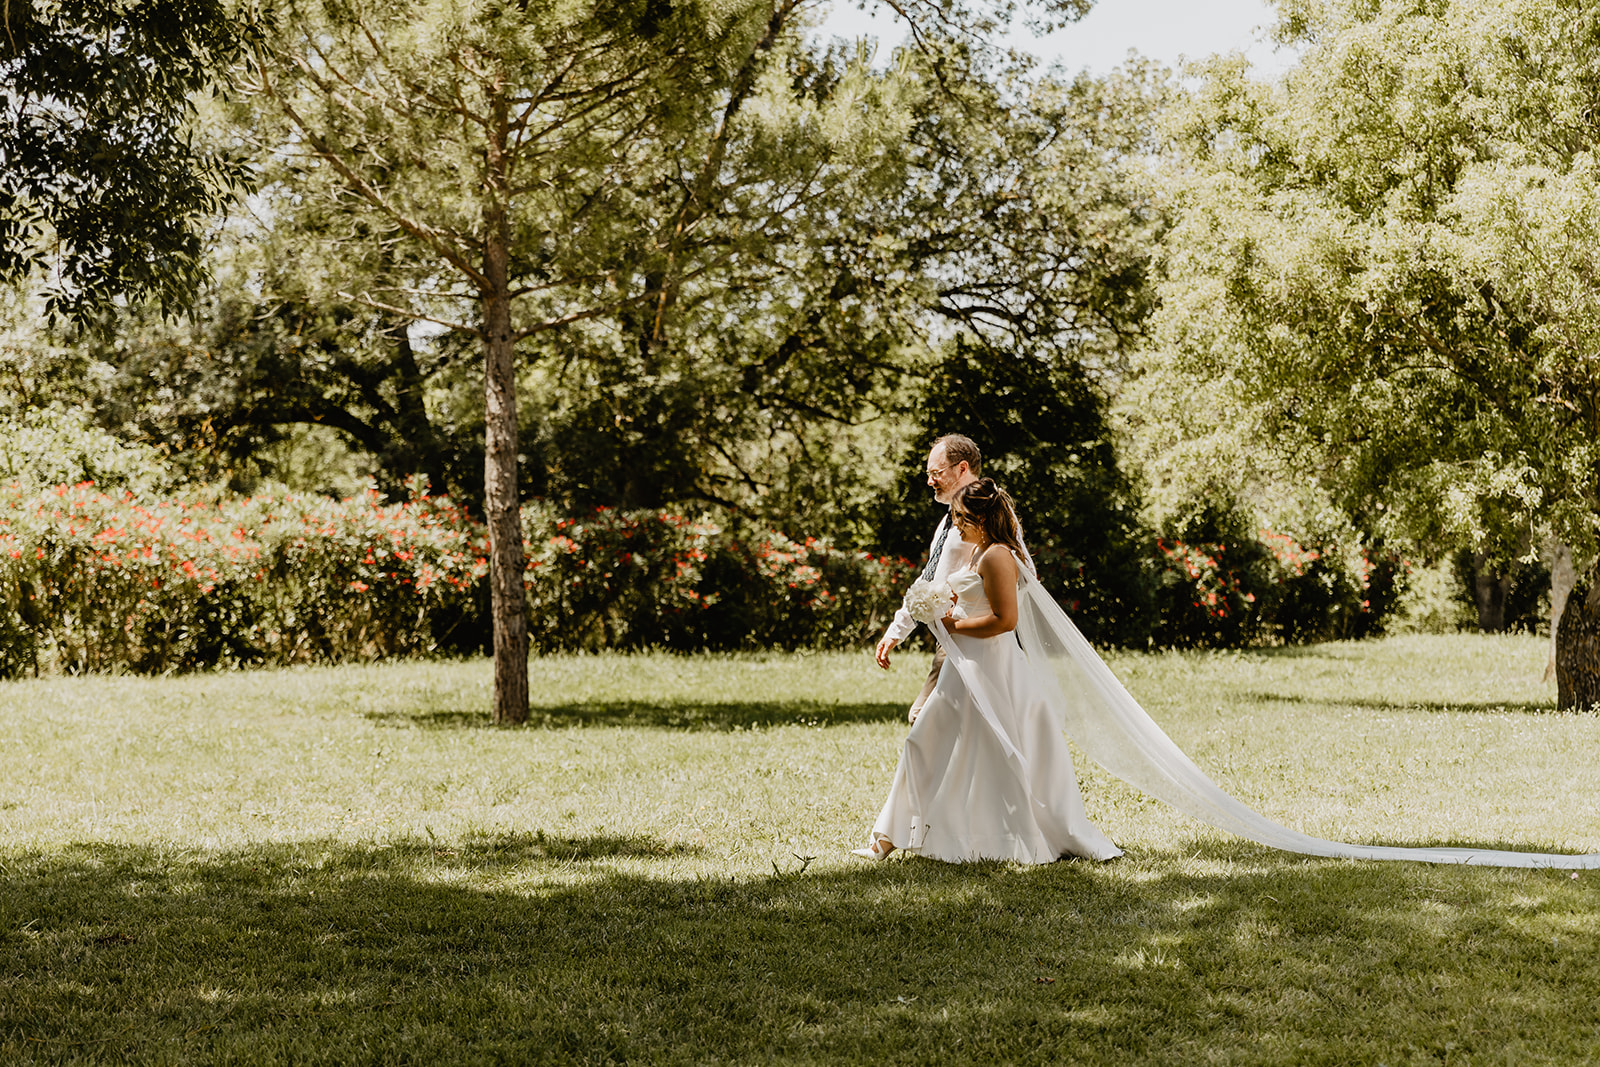 Bride and father walking at a Destination Wedding in France. Photography & Videography by OliveJoy Photography